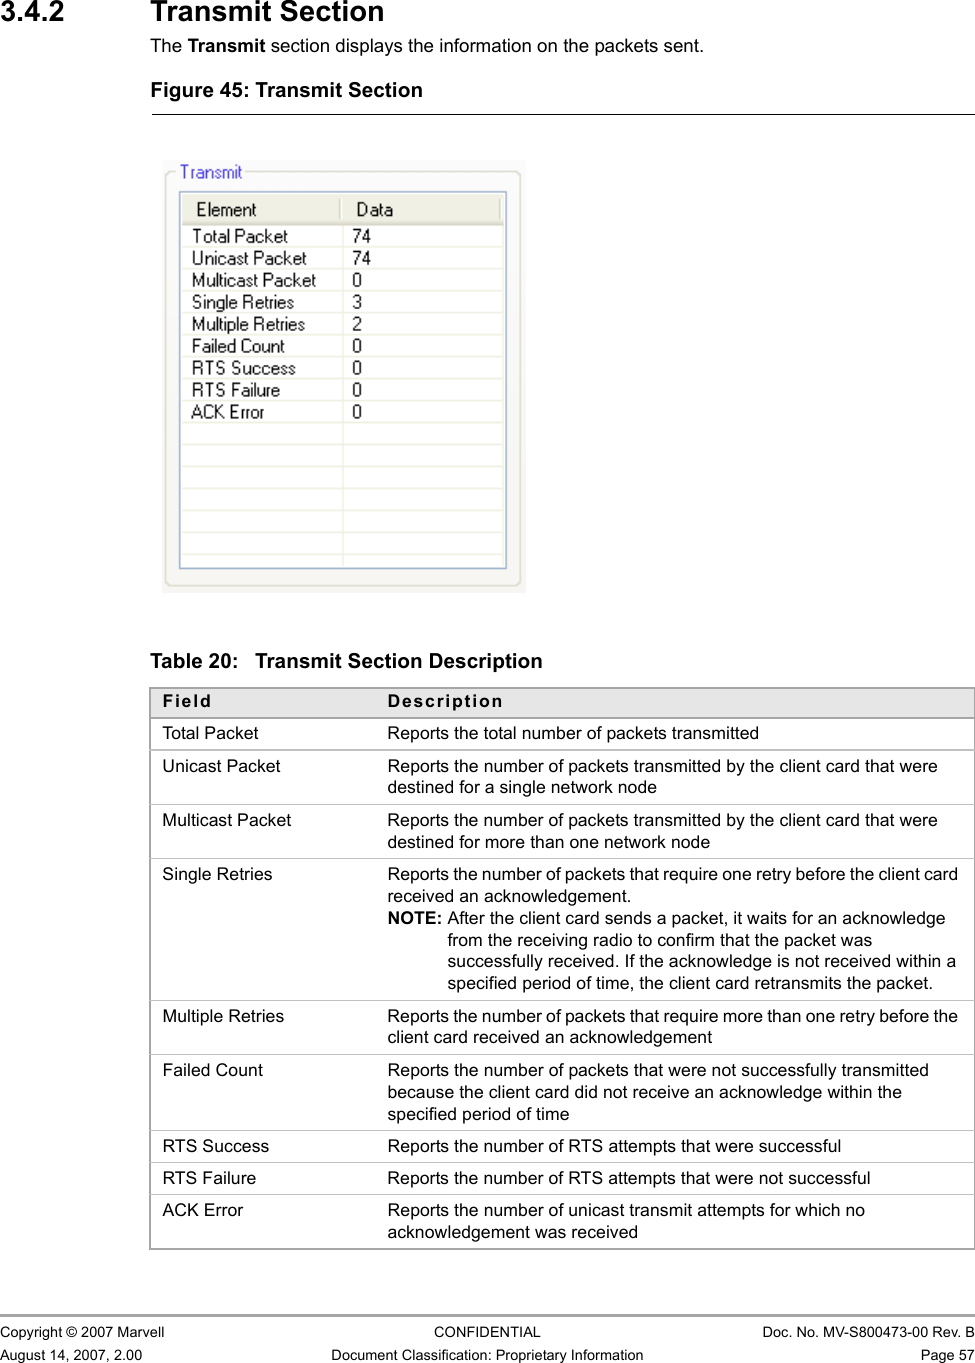 Marvell Wireless Configuration Utility User InterfaceStatistics Tab                         Copyright © 2007 Marvell CONFIDENTIAL Doc. No. MV-S800473-00 Rev. BAugust 14, 2007, 2.00 Document Classification: Proprietary Information Page 57 3.4.2 Transmit SectionThe Transmit section displays the information on the packets sent.                         Figure 45: Transmit Section                         Table 20: Transmit Section DescriptionField DescriptionTotal Packet Reports the total number of packets transmittedUnicast Packet Reports the number of packets transmitted by the client card that were destined for a single network nodeMulticast Packet Reports the number of packets transmitted by the client card that were destined for more than one network nodeSingle Retries Reports the number of packets that require one retry before the client card received an acknowledgement.NOTE: After the client card sends a packet, it waits for an acknowledge from the receiving radio to confirm that the packet was successfully received. If the acknowledge is not received within a specified period of time, the client card retransmits the packet. Multiple Retries Reports the number of packets that require more than one retry before the client card received an acknowledgementFailed Count Reports the number of packets that were not successfully transmitted because the client card did not receive an acknowledge within the specified period of timeRTS Success Reports the number of RTS attempts that were successfulRTS Failure Reports the number of RTS attempts that were not successfulACK Error Reports the number of unicast transmit attempts for which no acknowledgement was received